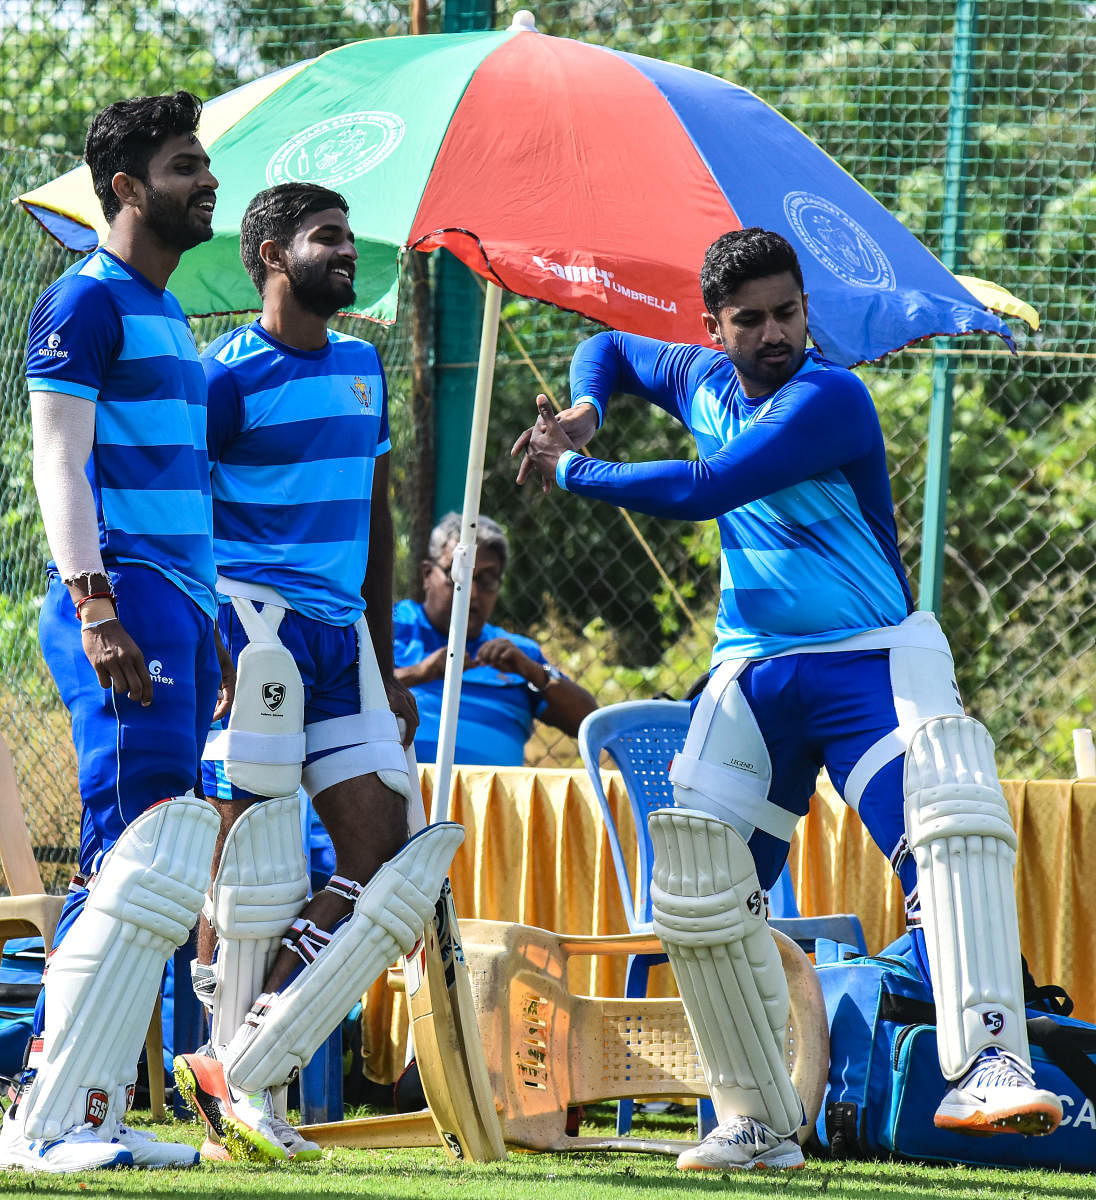 Karnakata stand-in skipper Karun Nair demonstrates a shot as Rohan Kadam (left) and R Samarth look on during a practice session in Hubballi on Monday. DH Photo/ Tazuddin Azad